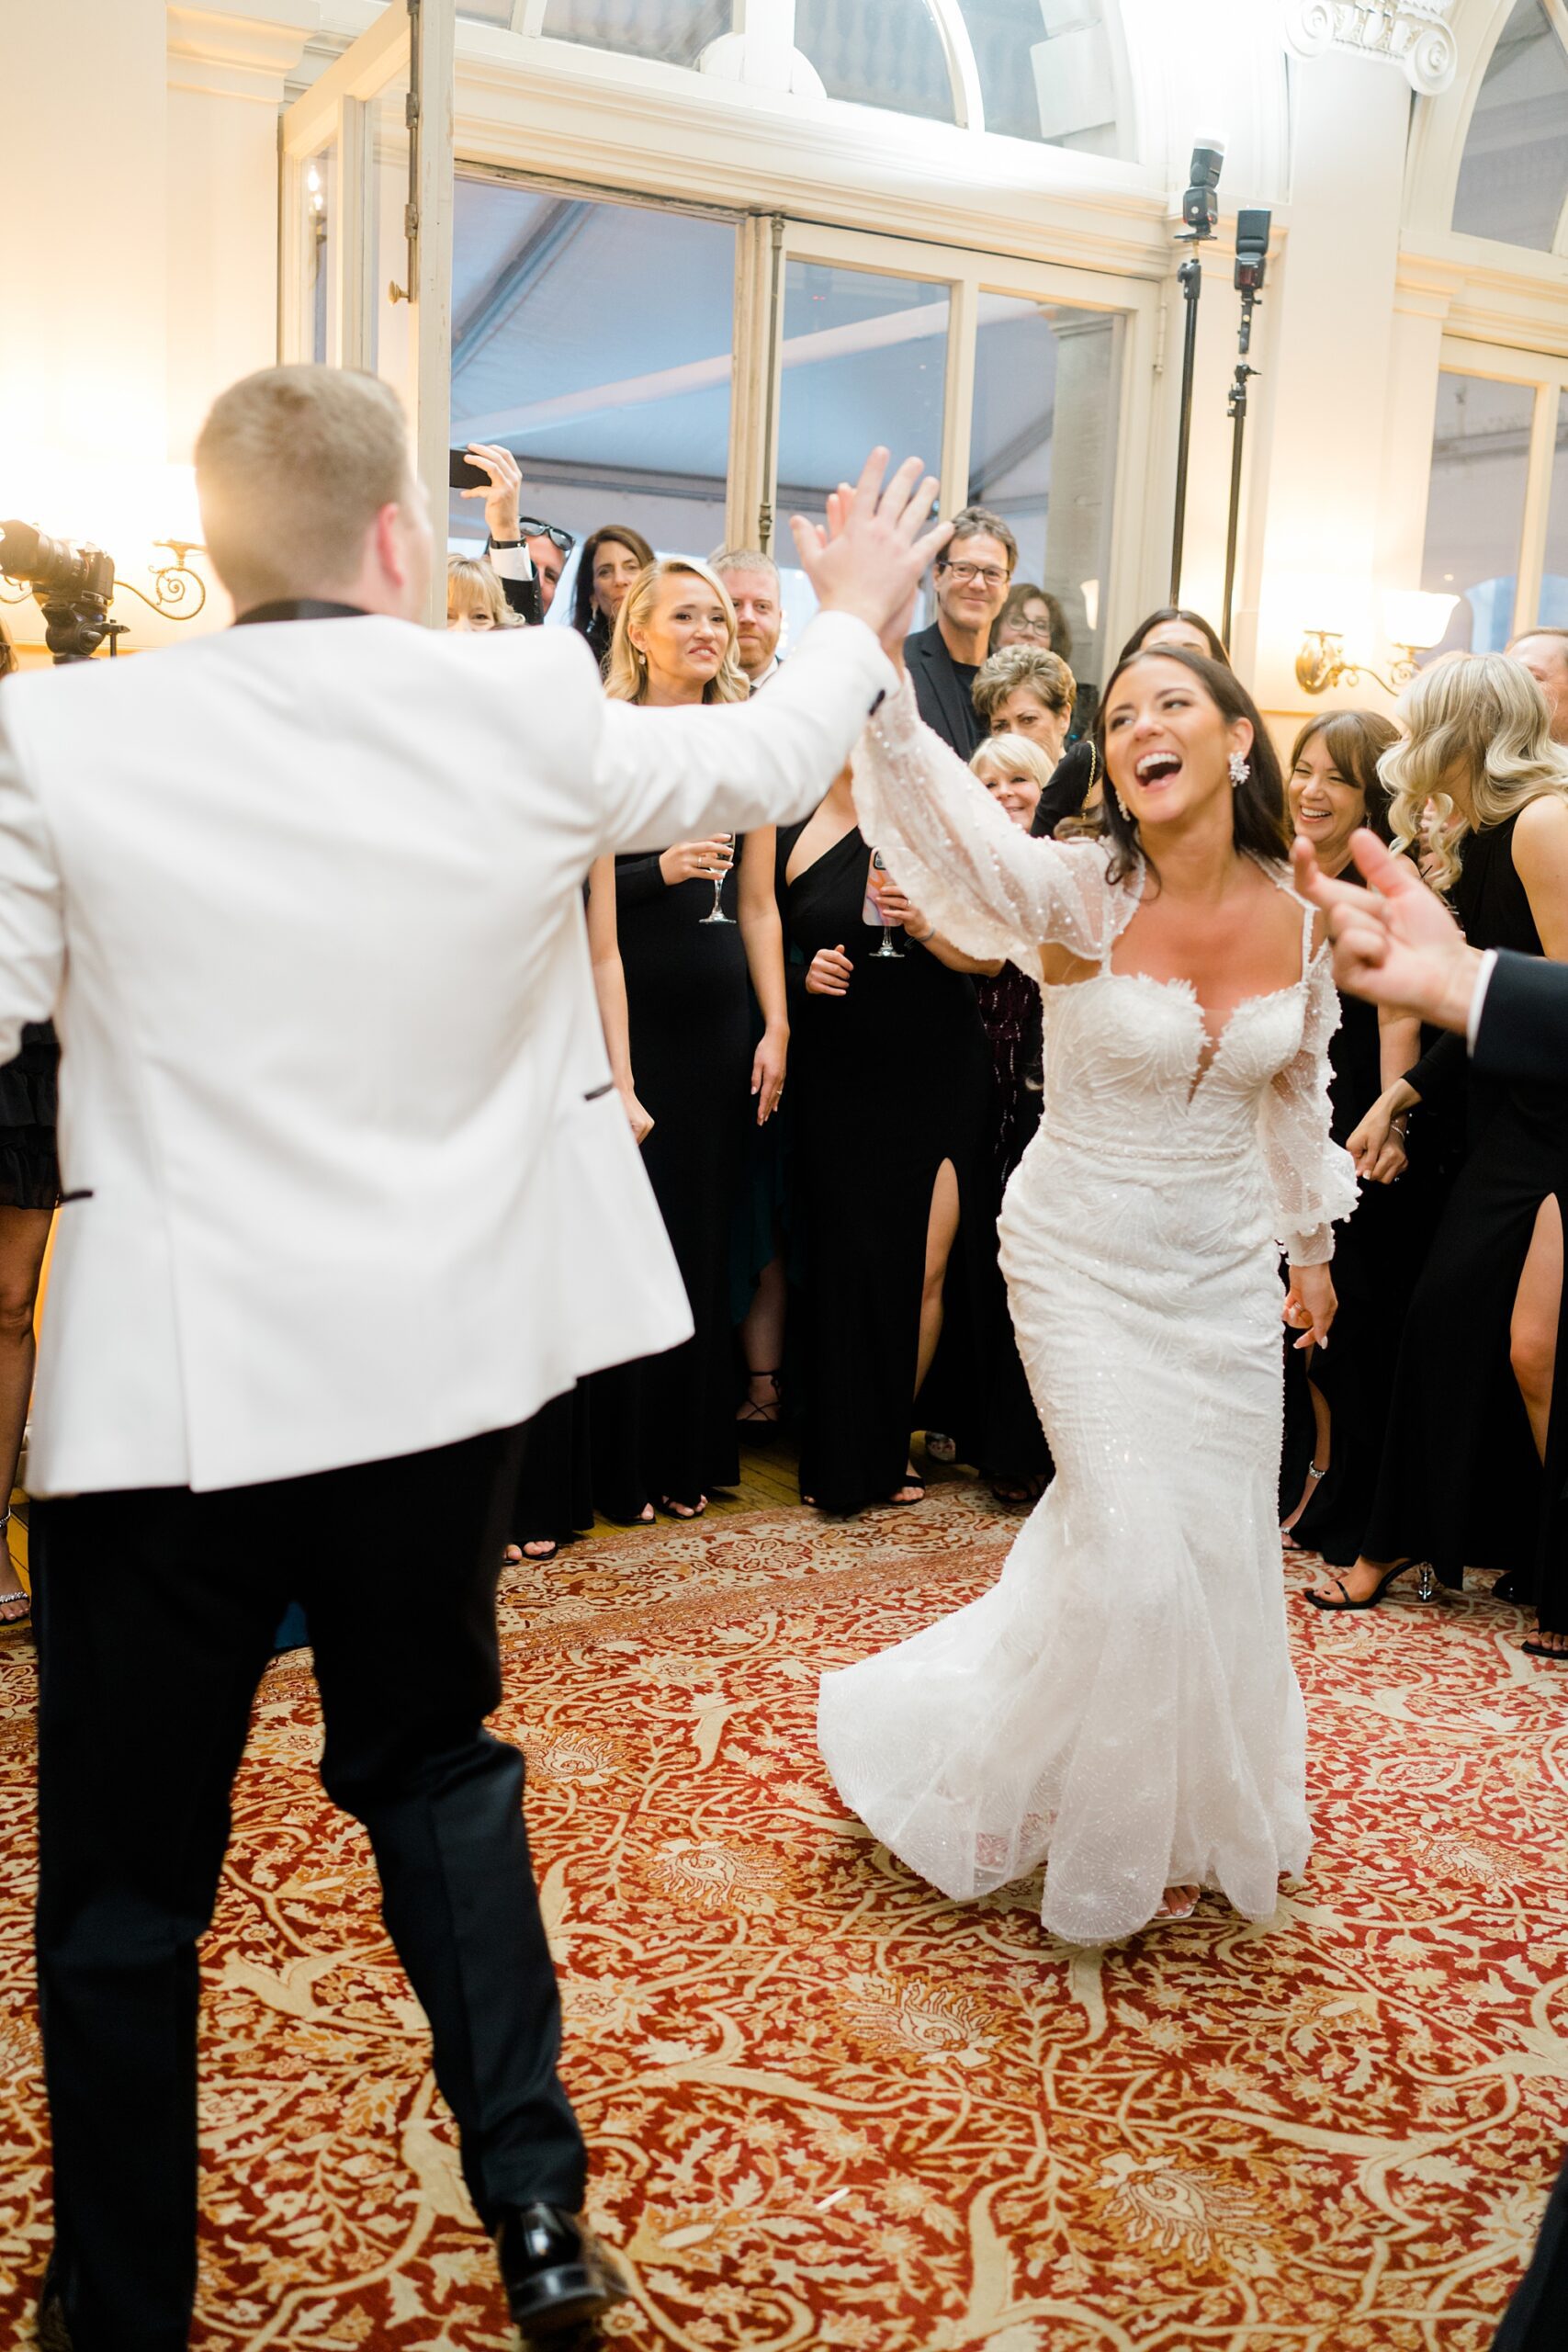 5 Tips for Crafting a Wedding Day Timeline | Capturing reception activities